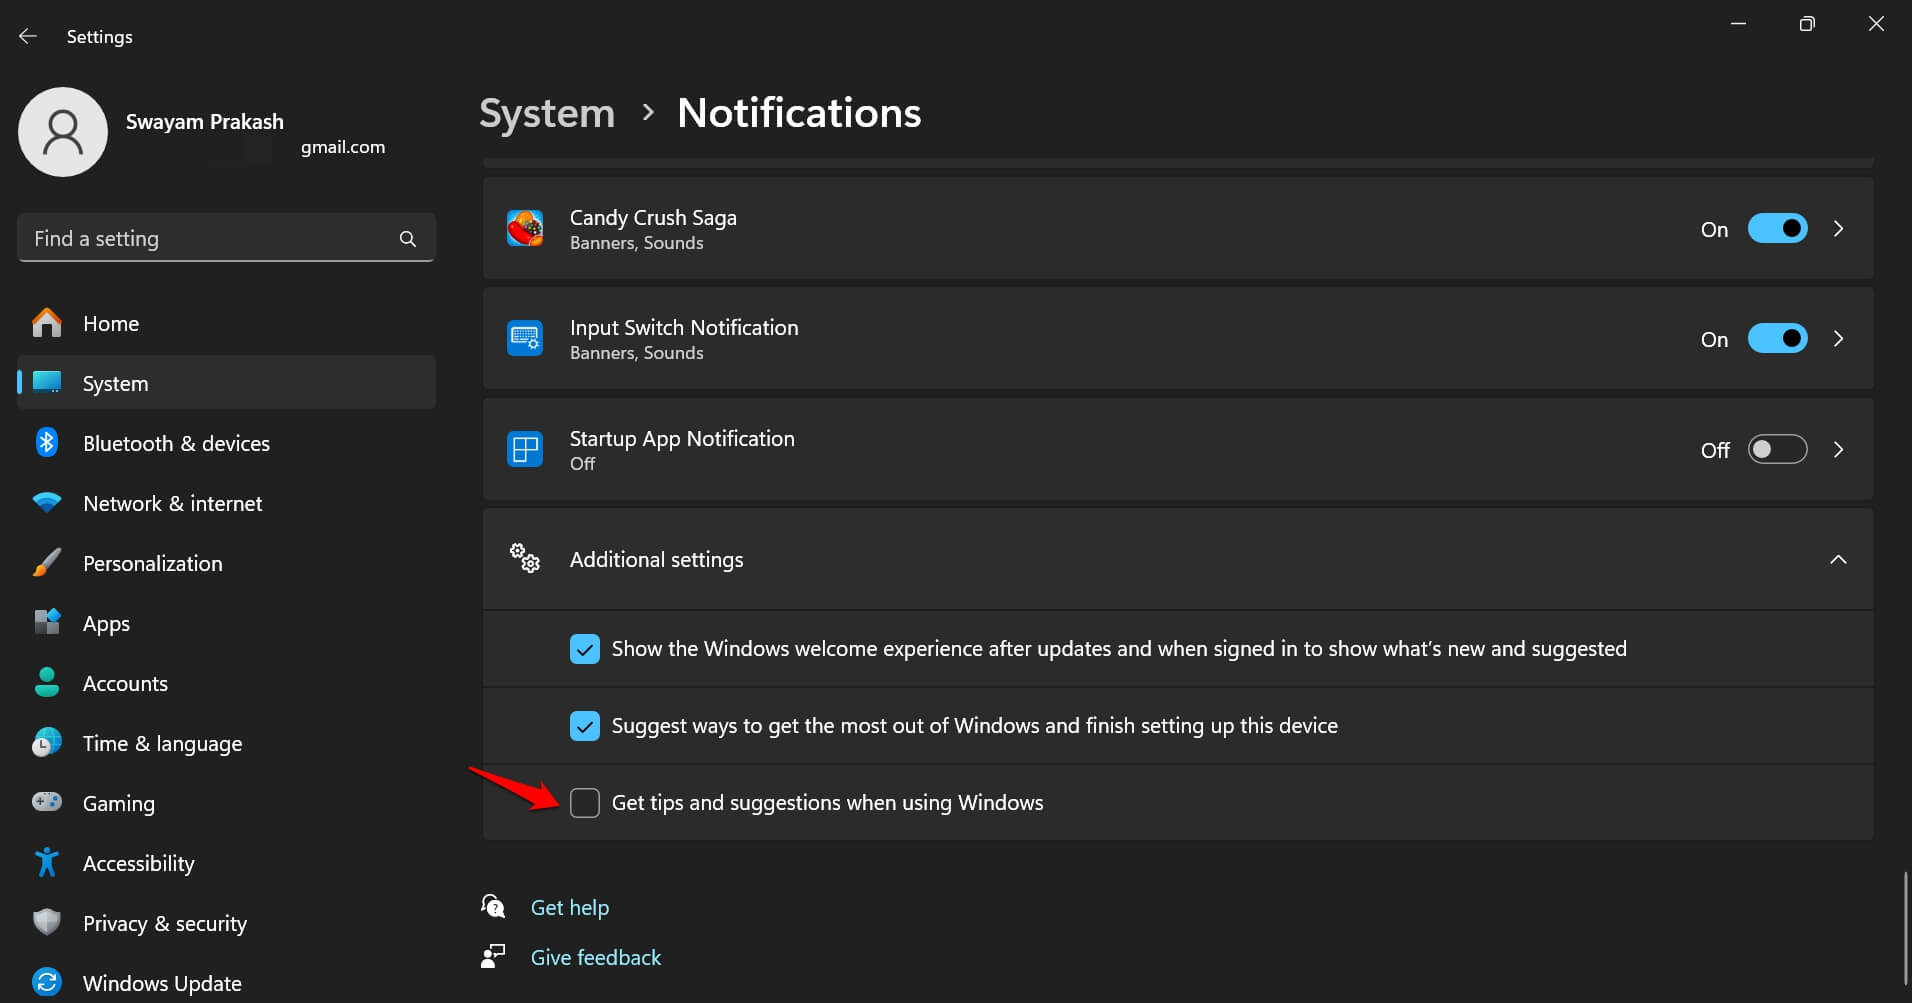 disable-tips-and-suggestions on Windows 11 from settings app